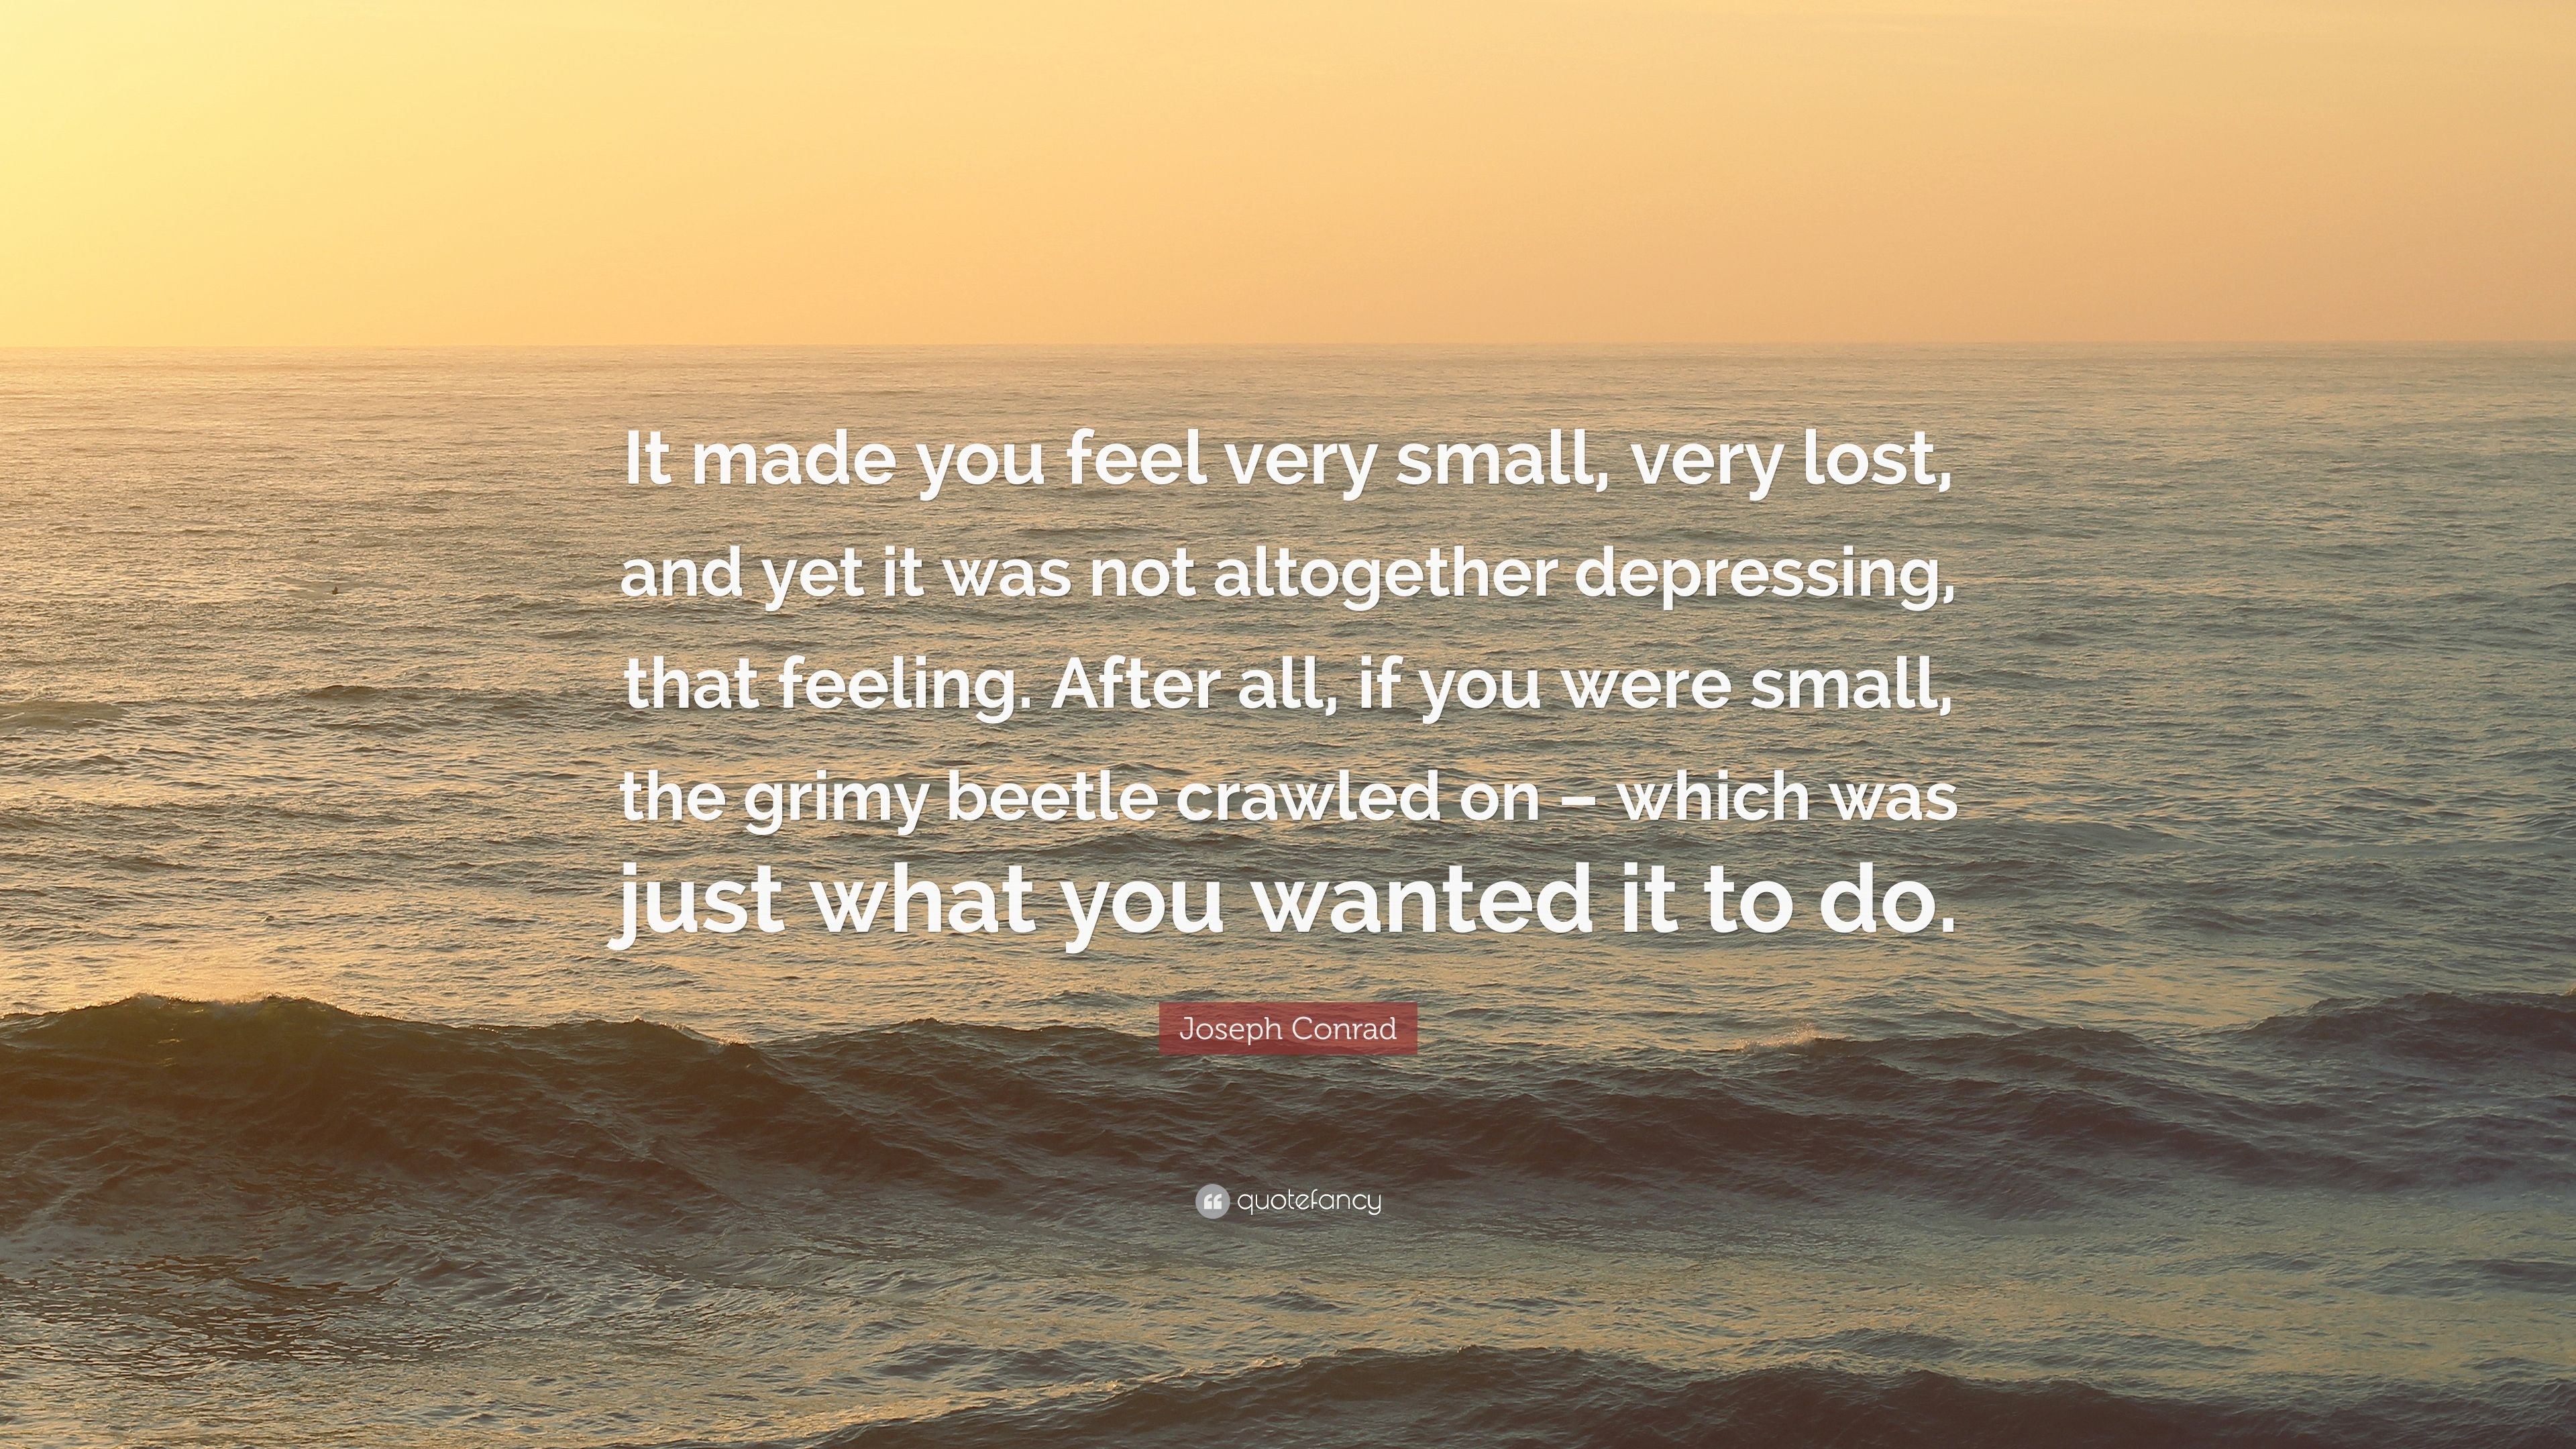 Joseph Conrad Quote: “It made you feel very small, very lost, and ...